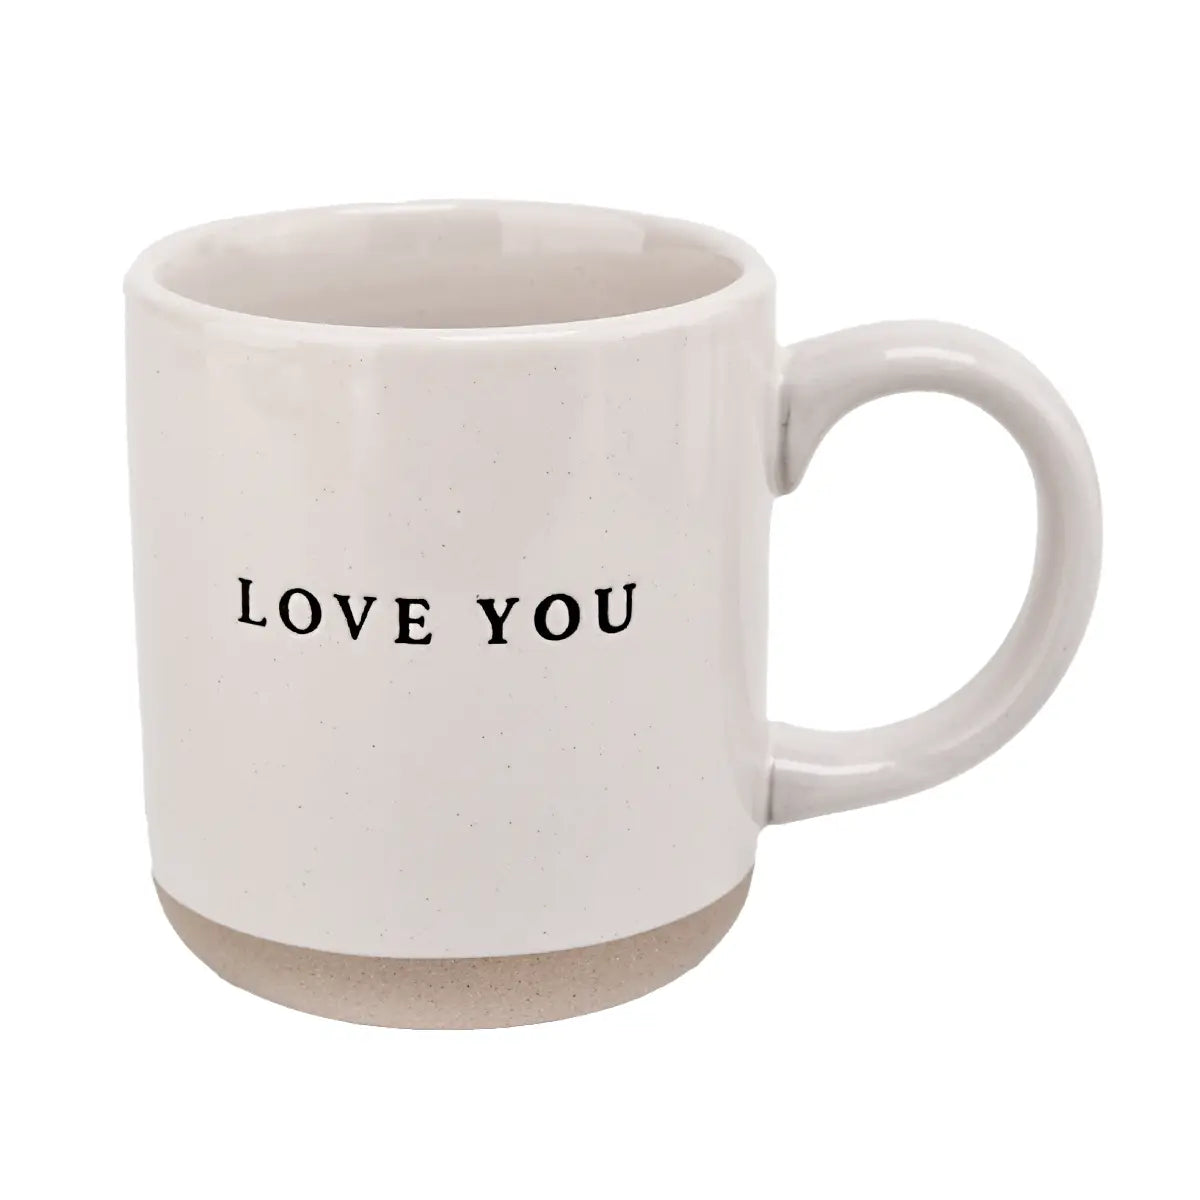 Neutral stone love you mug valentines day galantine's day gift for her sweet woman-owned Modern smart causal female chic effortless outfit womens ladies gift elegant effortless clothing clothes apparel outfits chic winter style women’s boutique trendy teacher office cute outfit boutique clothes fashion work from home lounge athleisure holiday gift for her midsize curvy sizes 